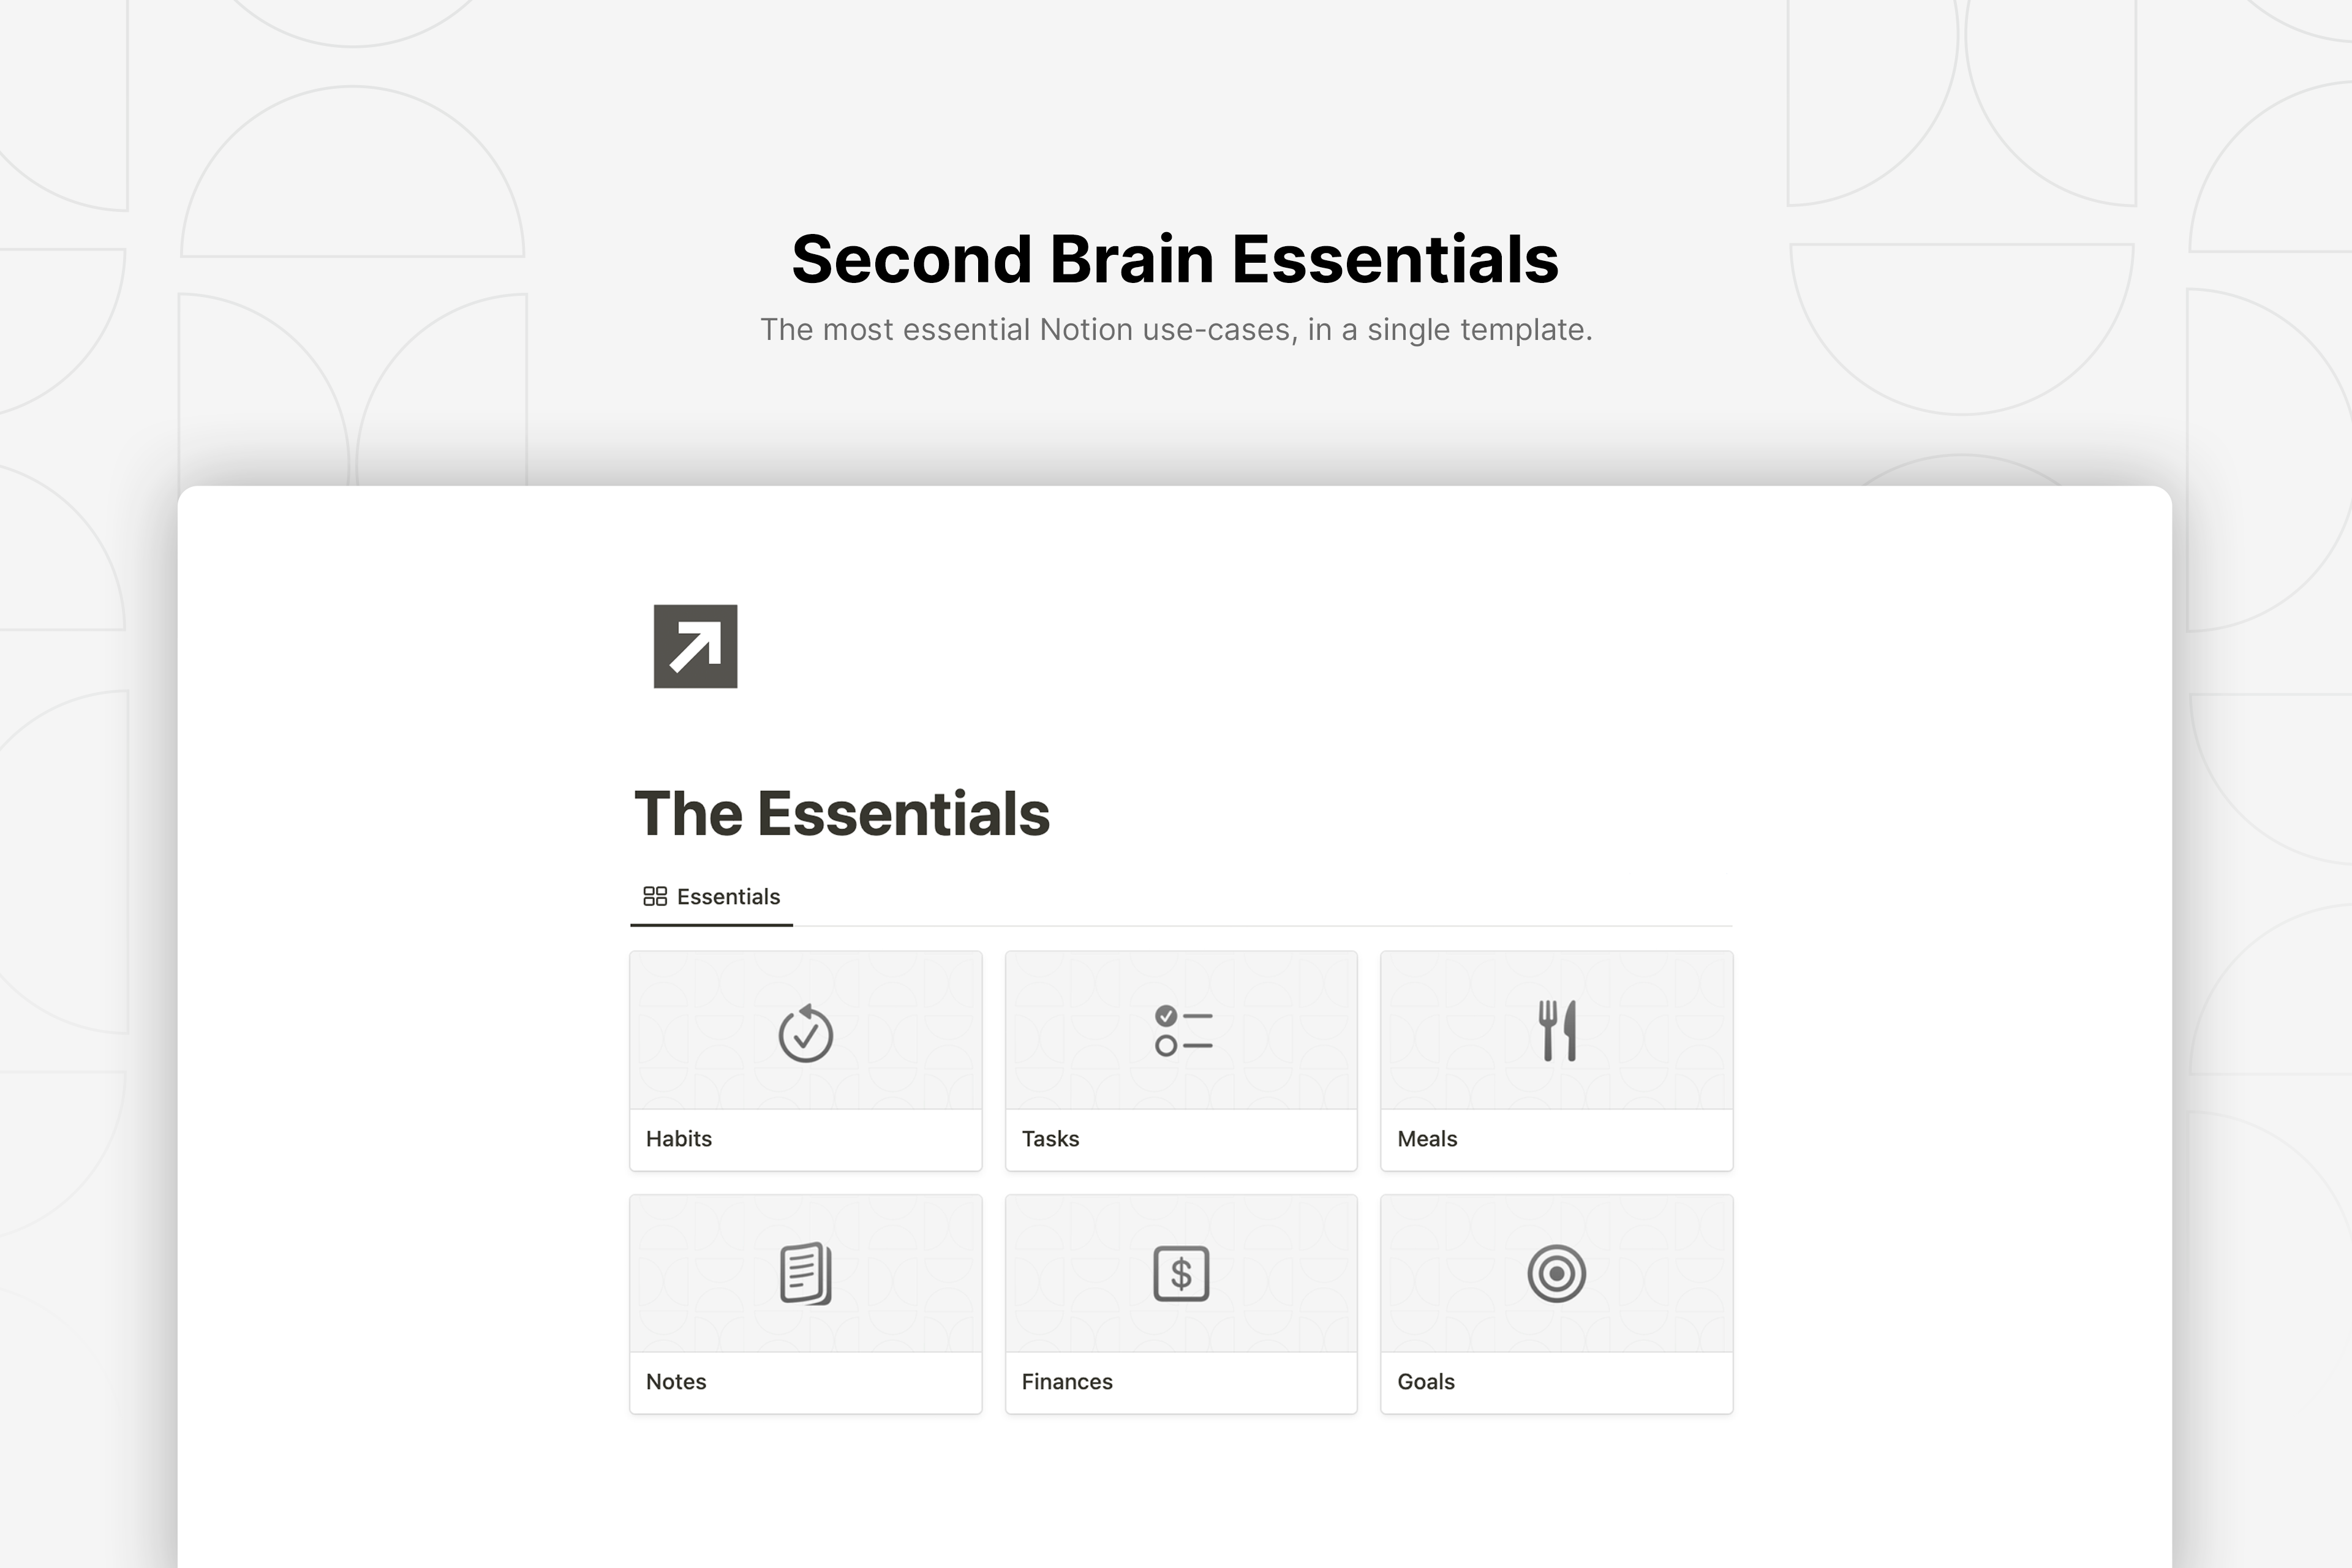 Finally, a simple second brain template.

An intuitive template that's designed for your day-to-day use. No fancy tricks, just pure Notion treats. 

Track Habits, Tick Off Tasks, Plan Meals, Set Goals, Manage Finances, and Capture Notes - all in one place!